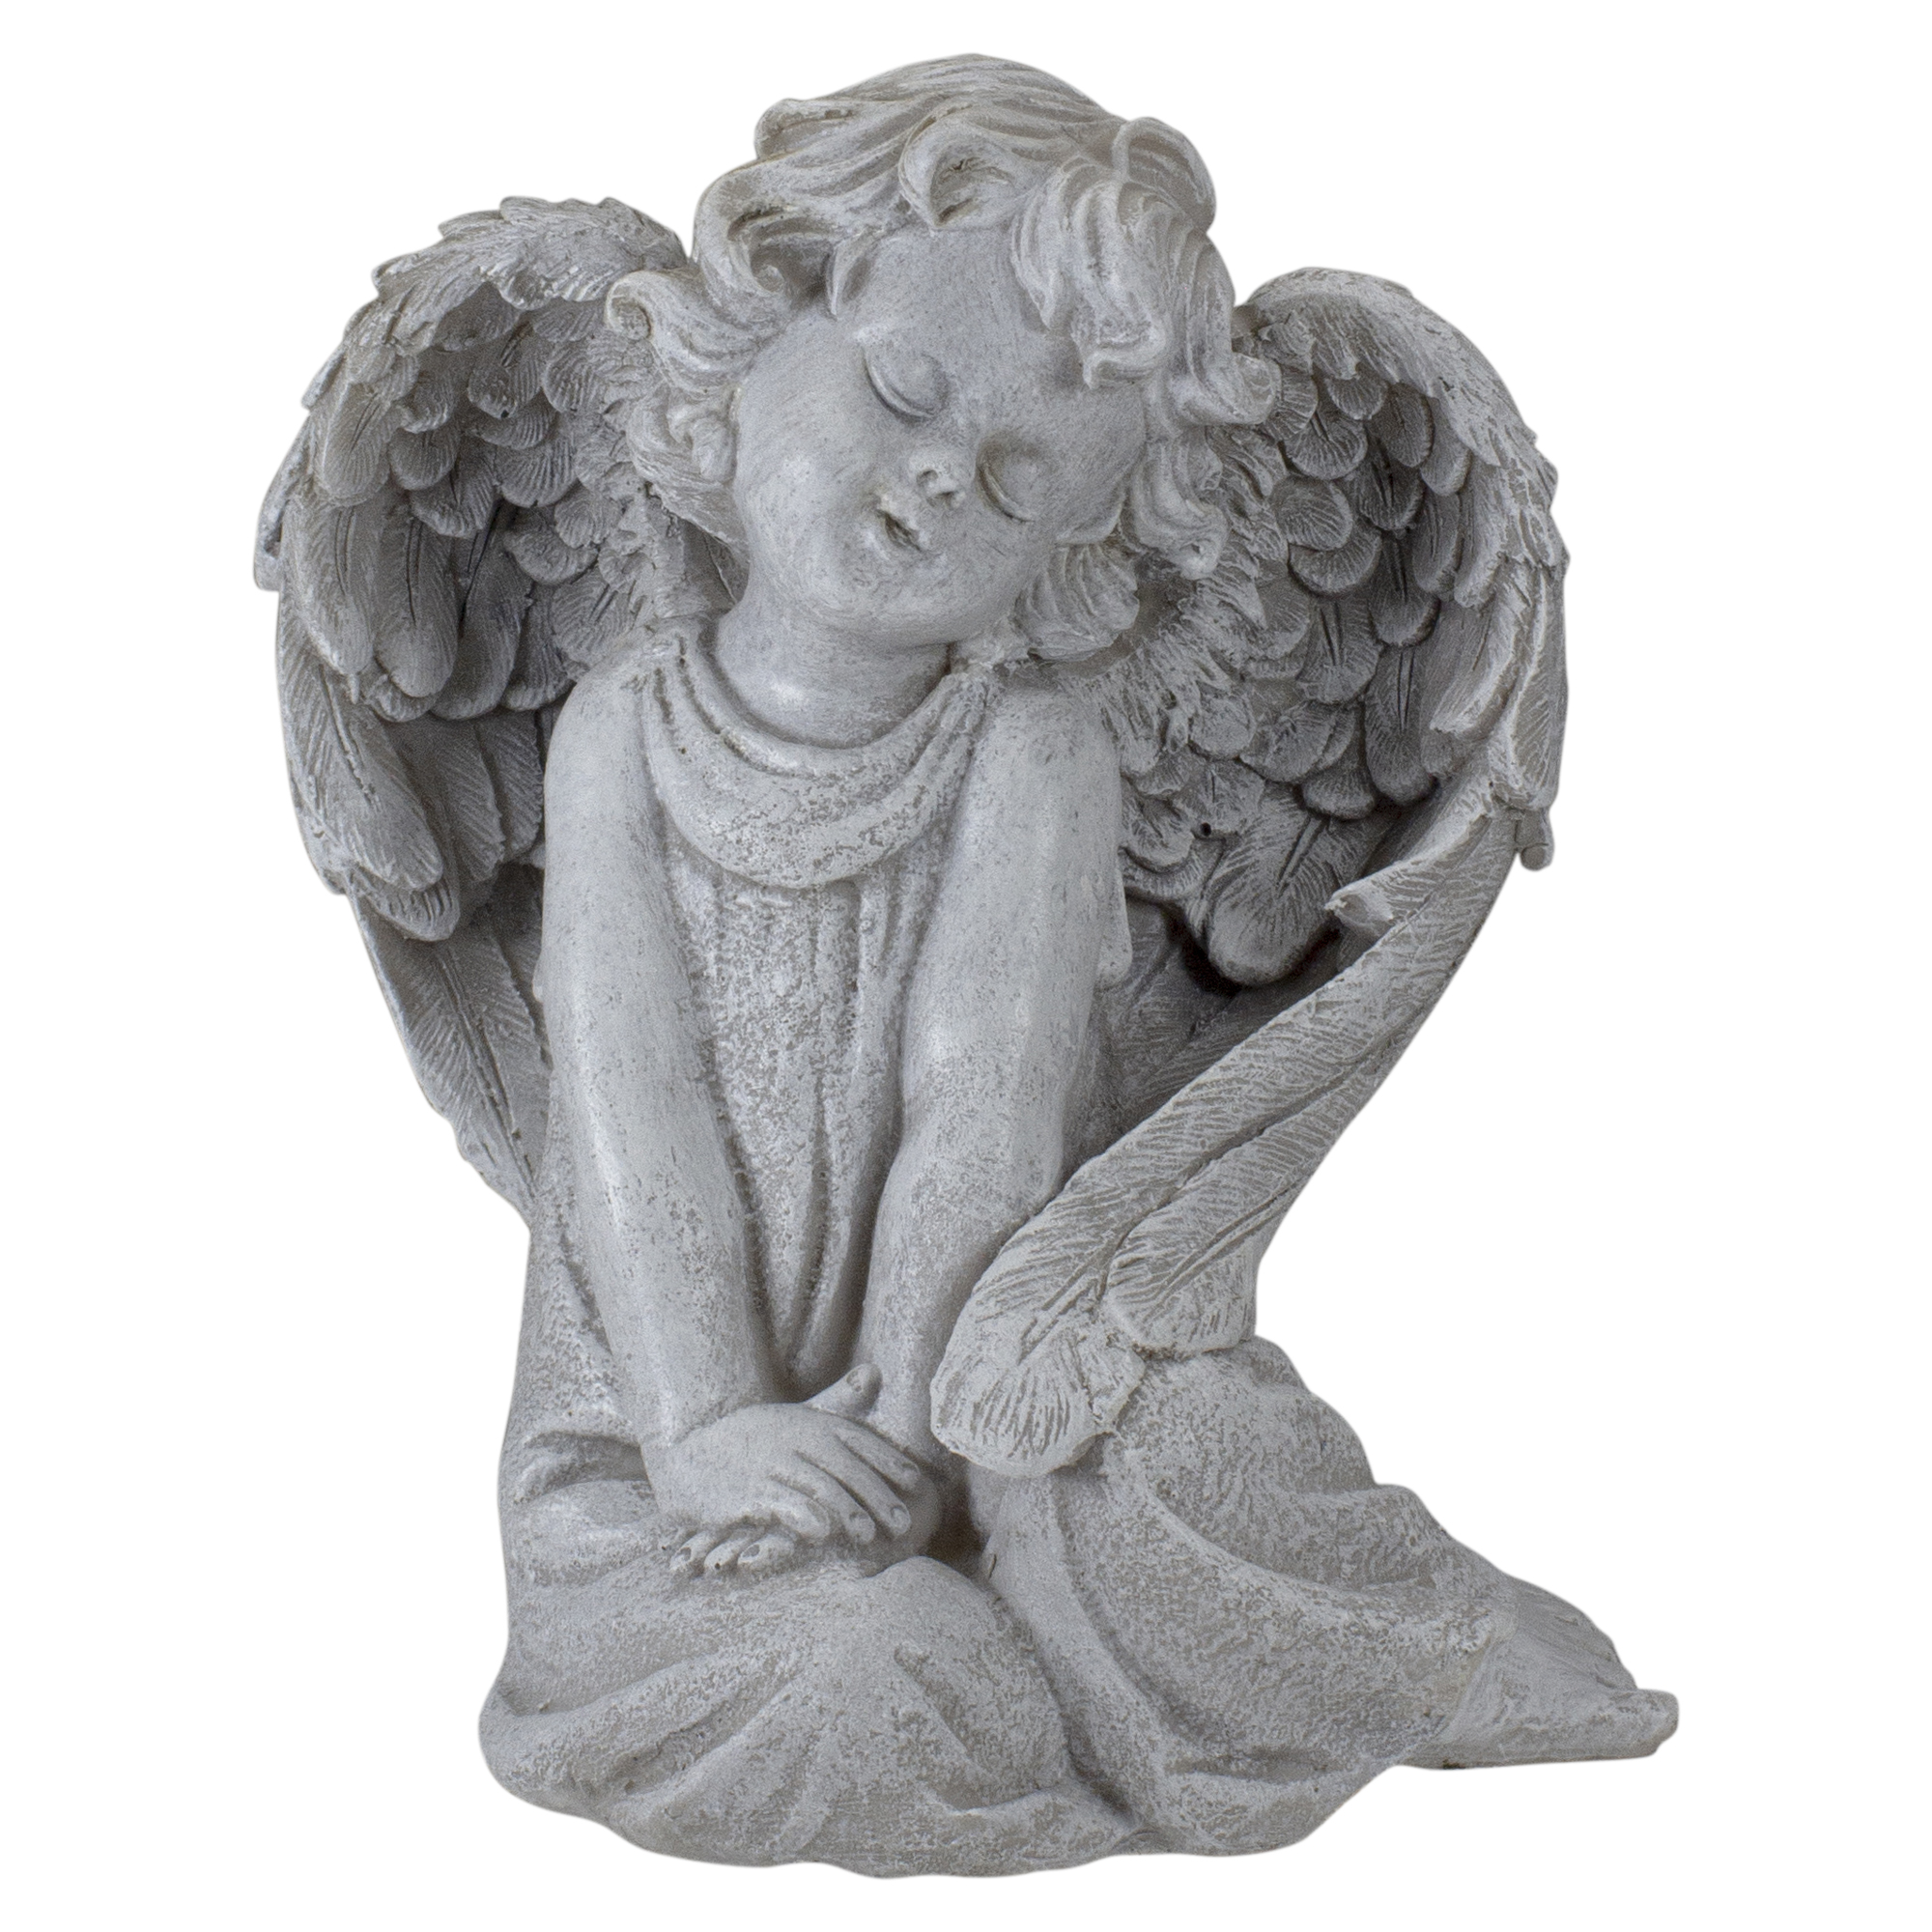 Northlight 8.75" Gray Sitting  Angel with Wings Outdoor Garden Statue - image 1 of 5